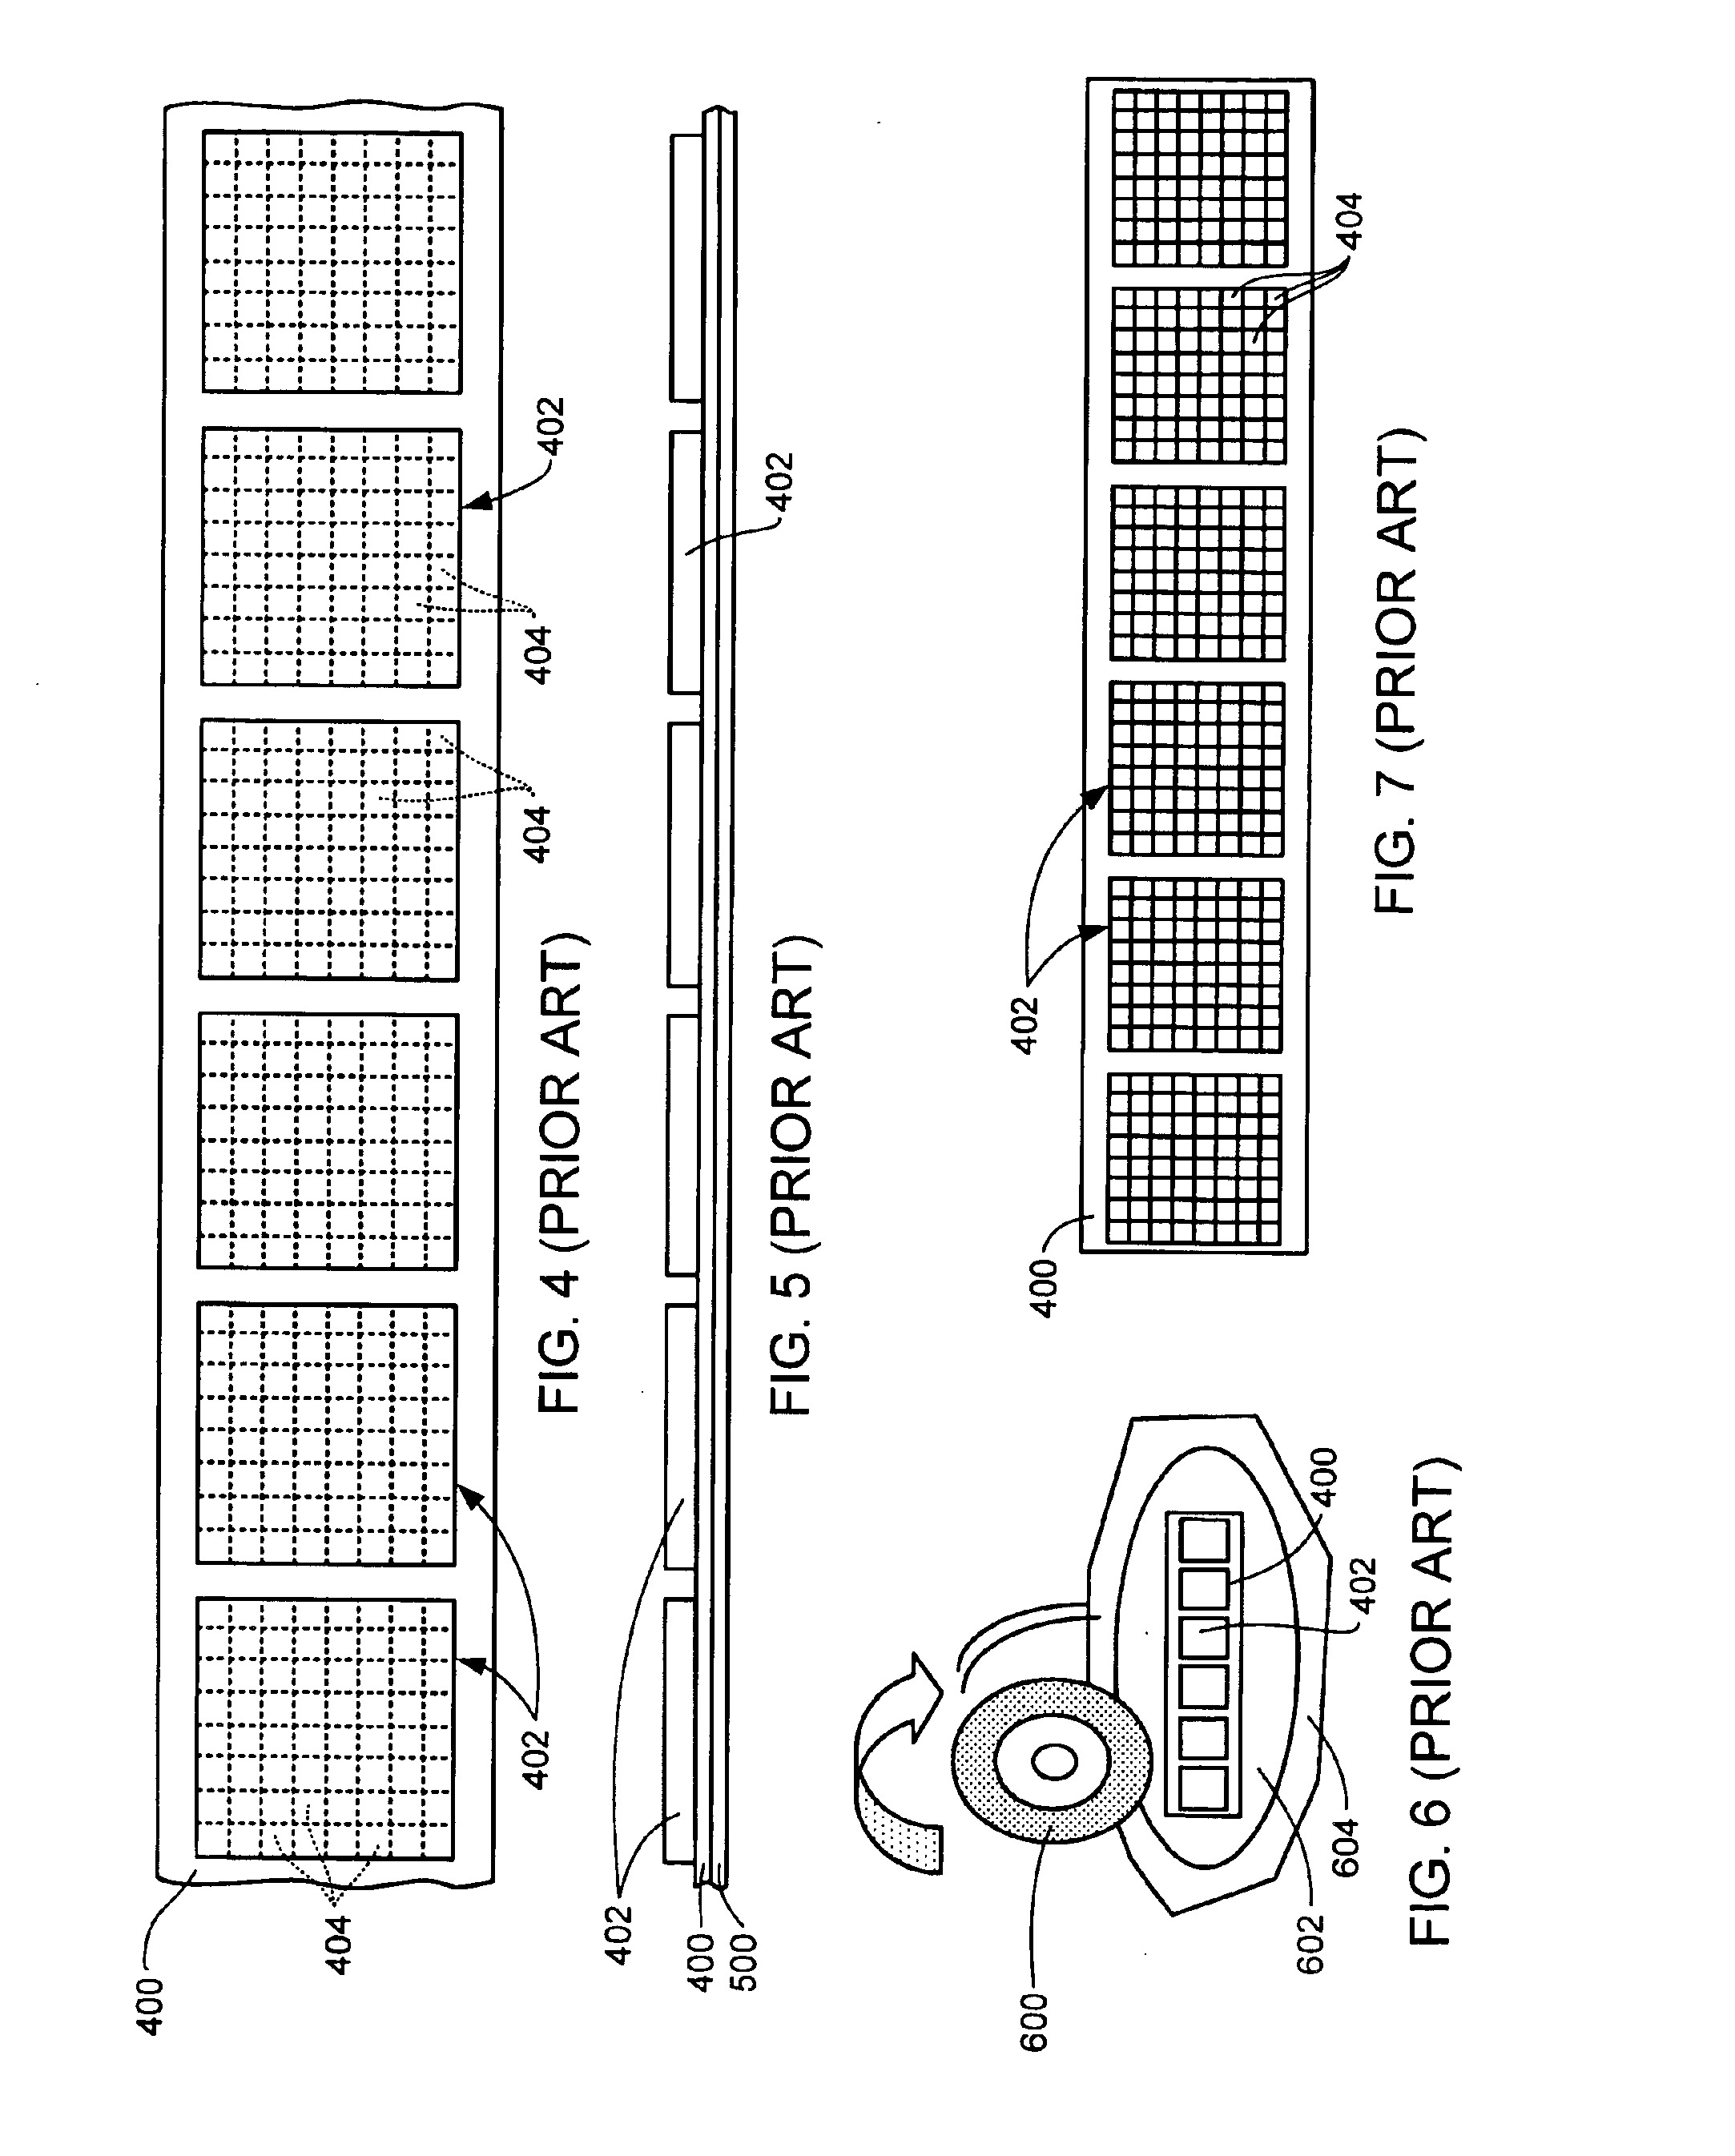 Method for fabricating semiconductor packages, and leadframe assemblies for the fabrication thereof